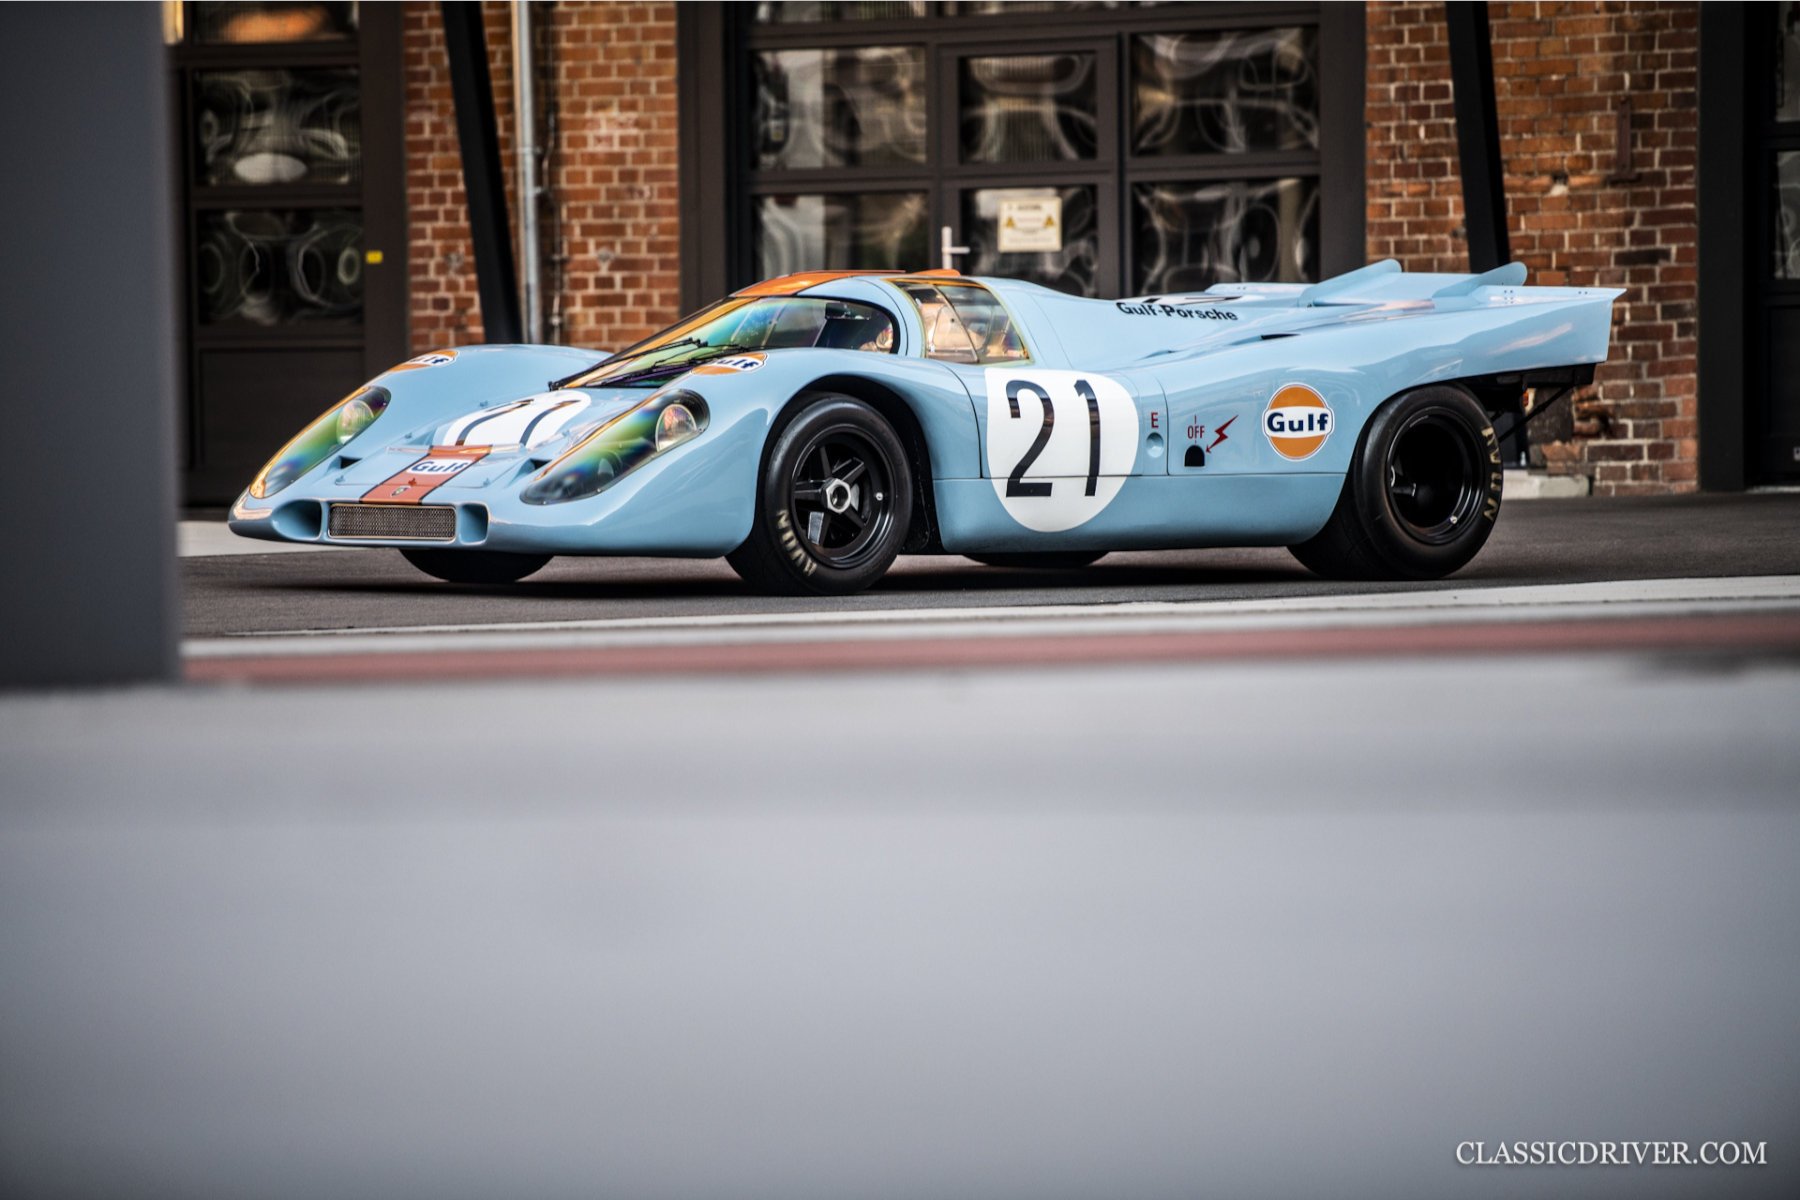 The famous Porsche 917K in Gulf colors